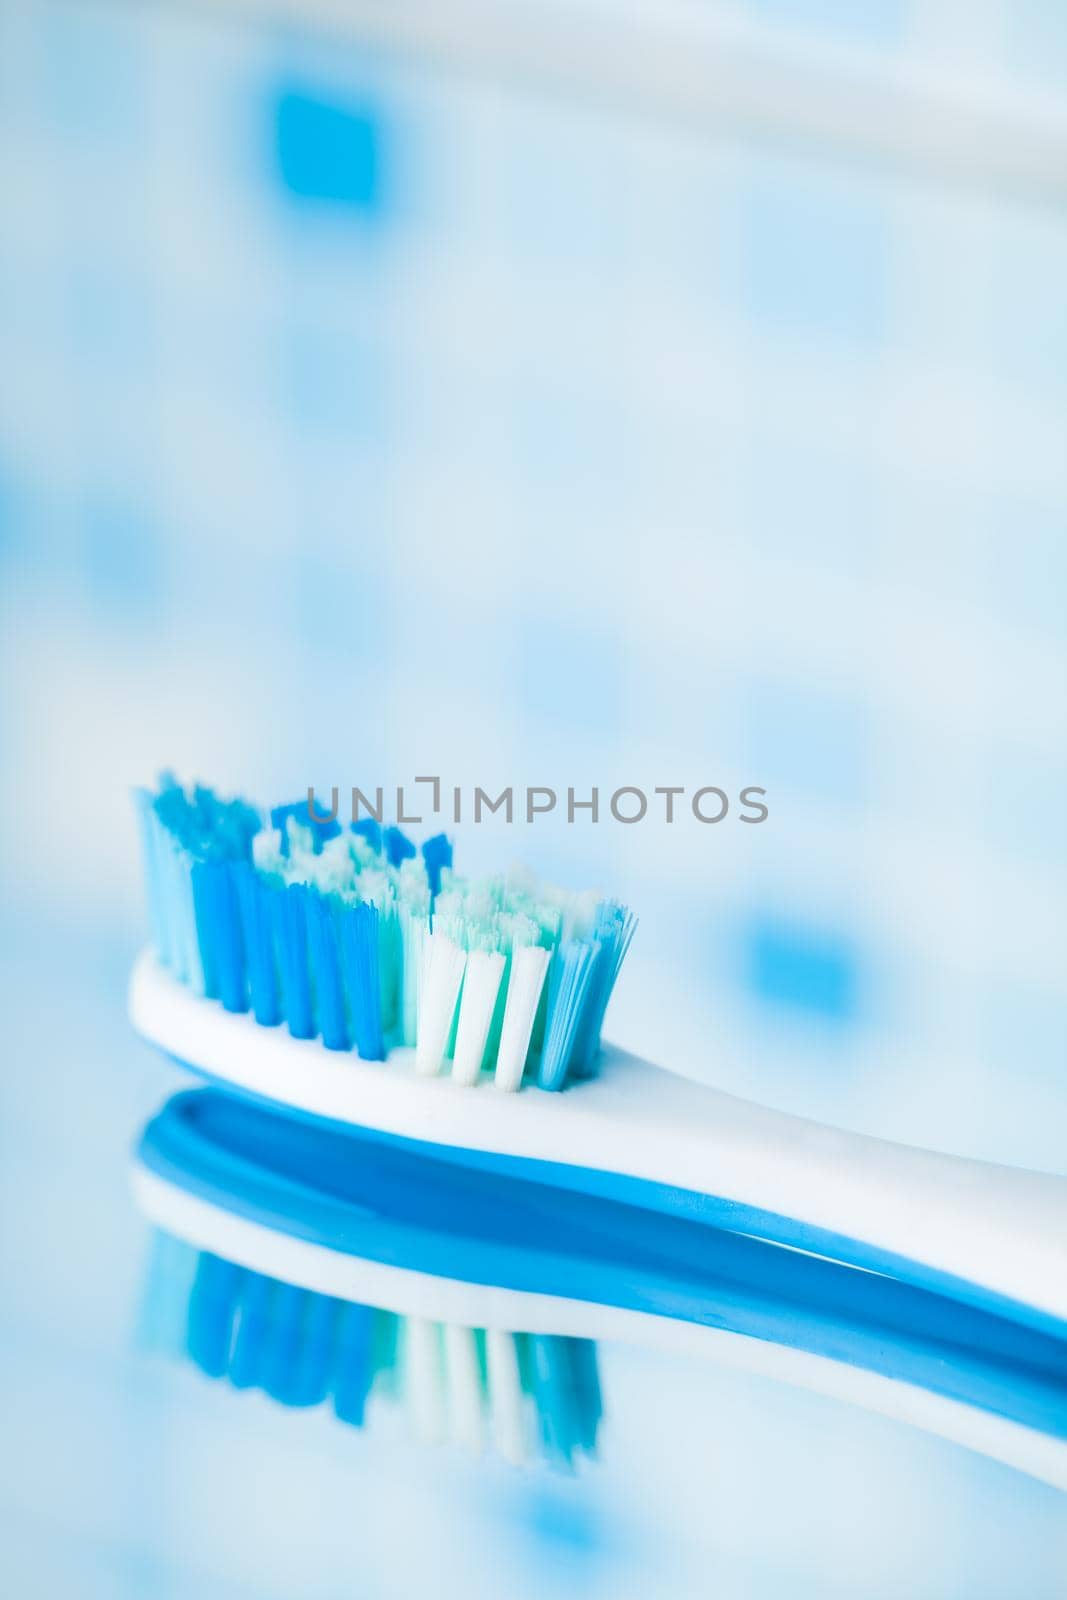 toothbrush on blue tile background with mirror reflection by nikkytok